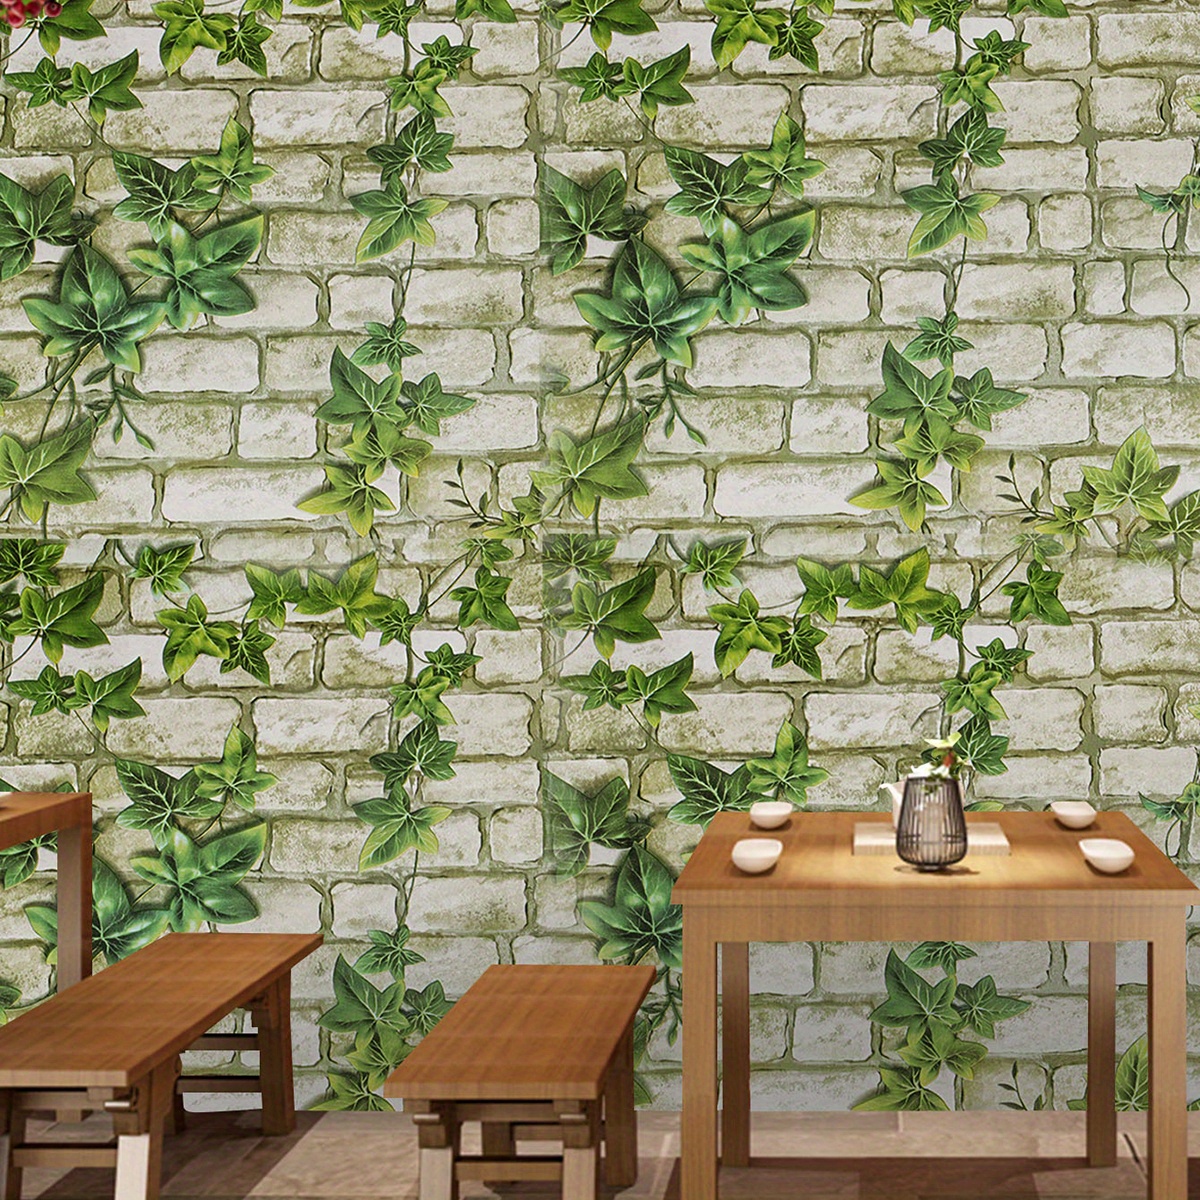 Brick Wall, Old Style - Wallpaper